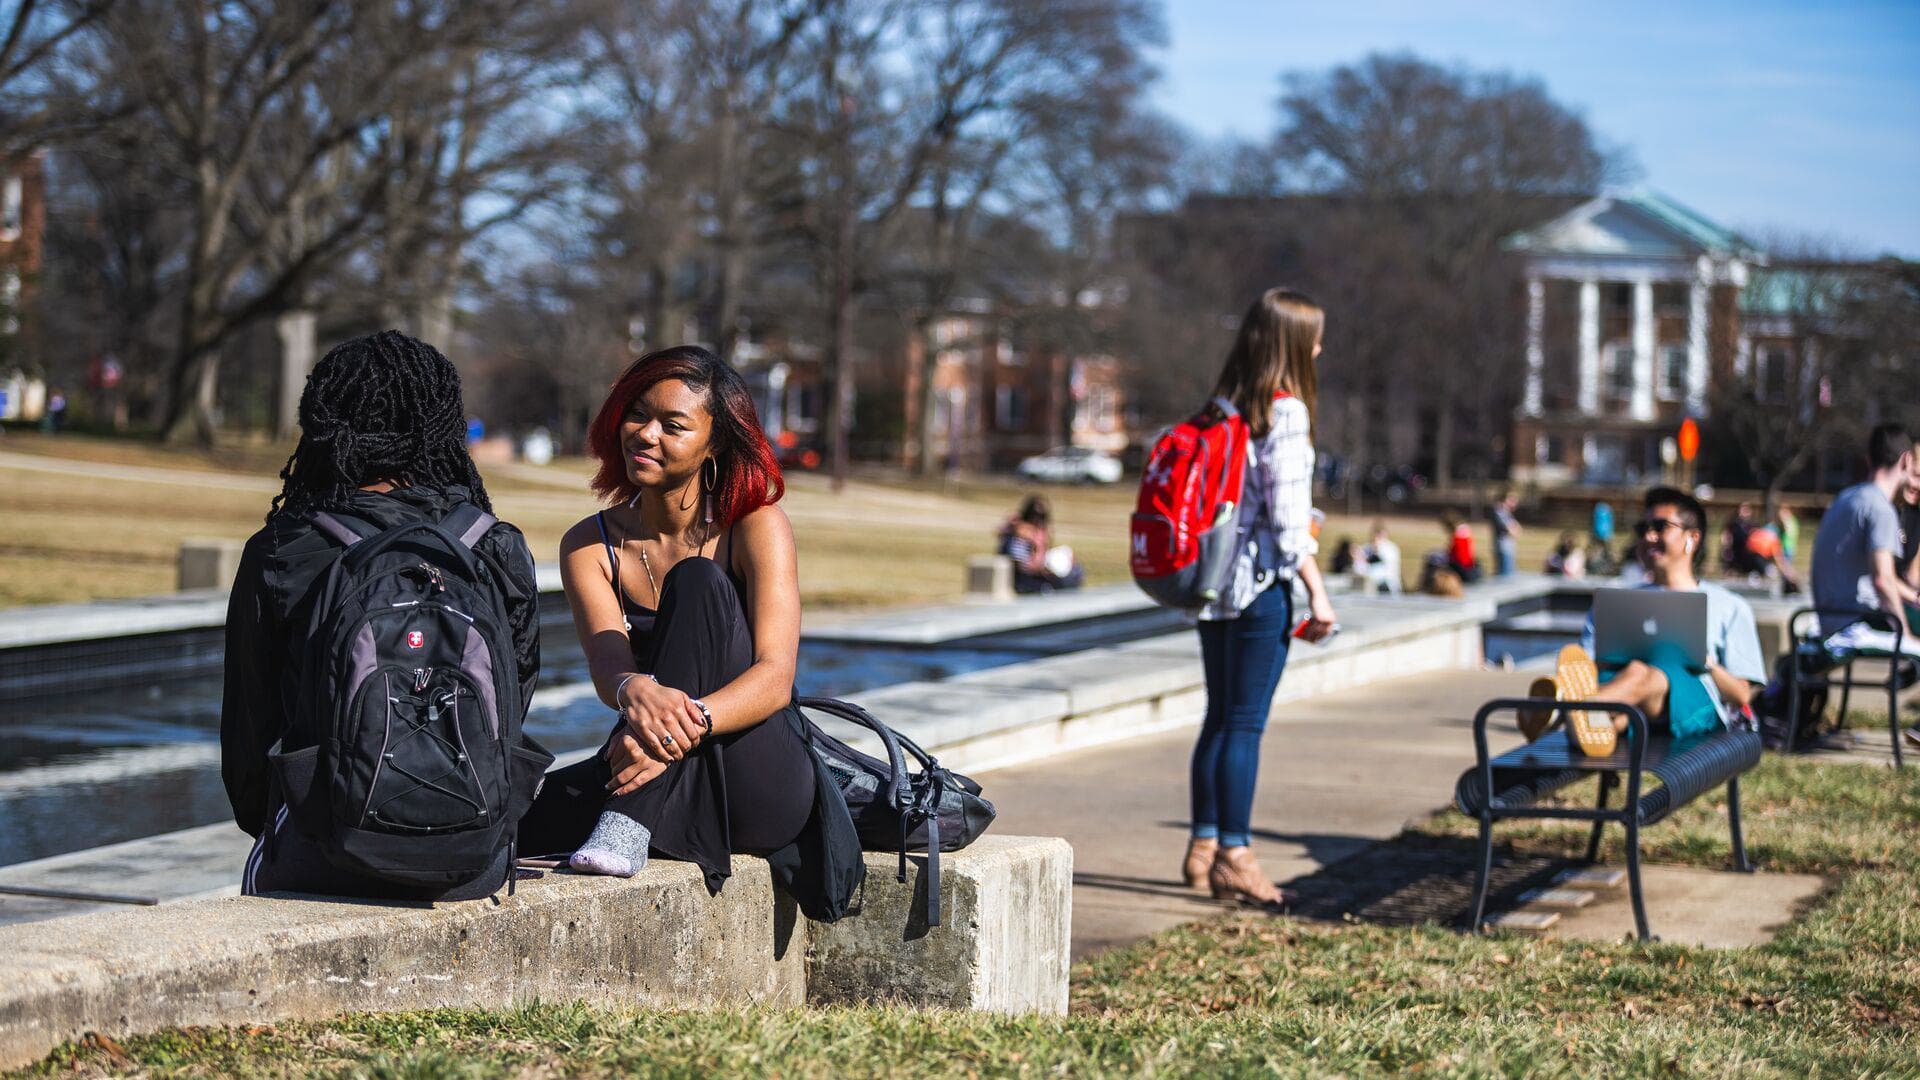 Students sit, stand, and lounge in the benches along the UMD mall.